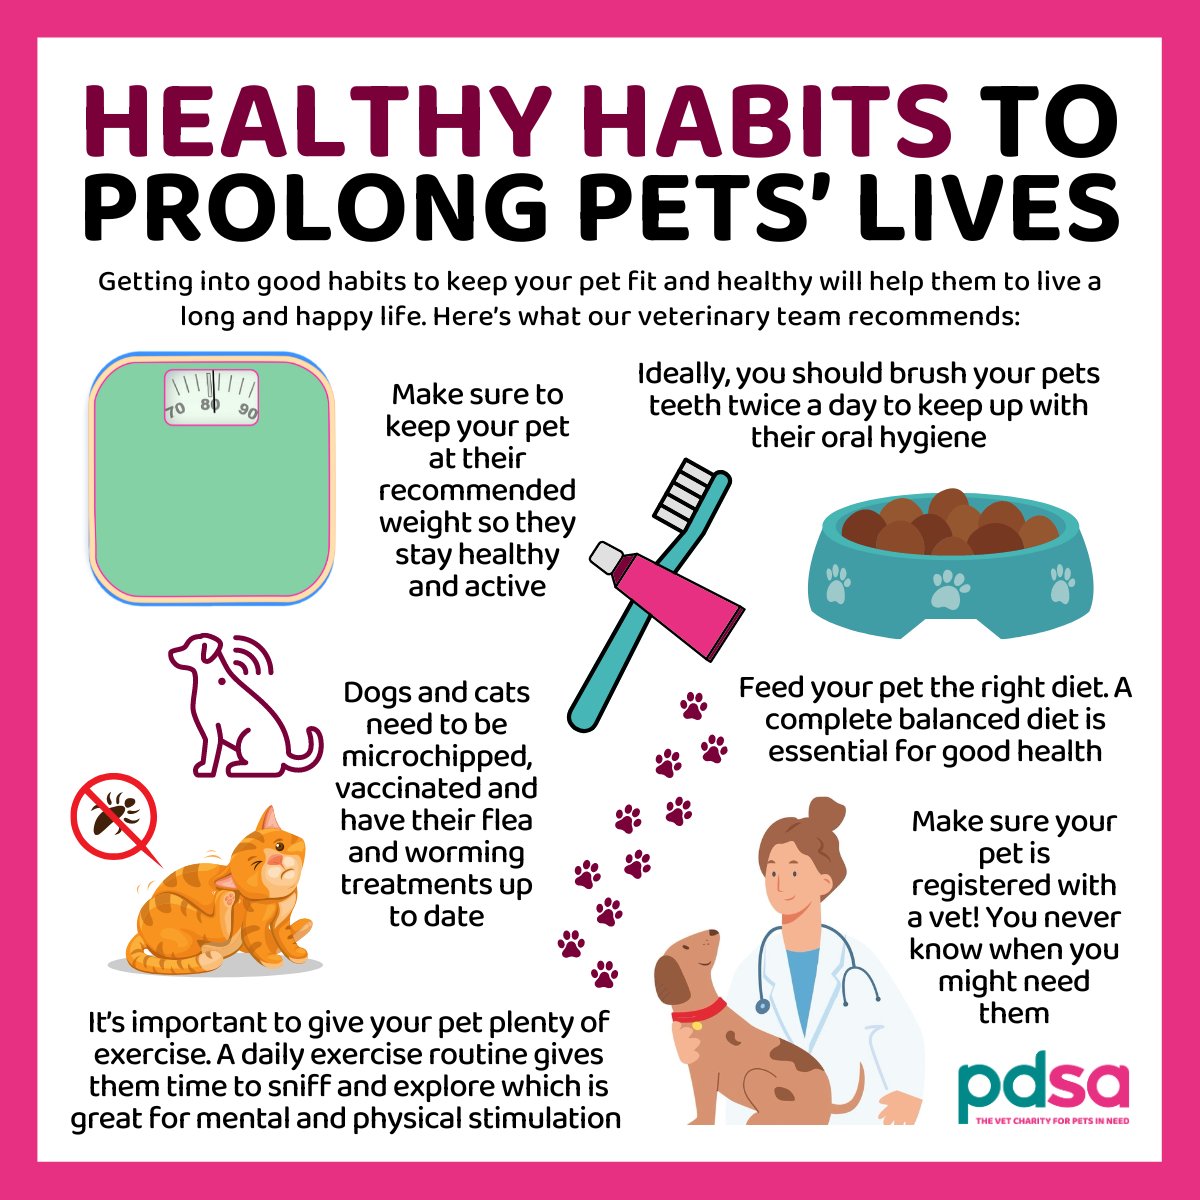 Does your pet follow these healthy habits? 🐾 To help our furry friends live a long and happy life, there are lots of things you can include in their routines. Here are some suggestions from our veterinary team 🏥 #PetsOfTwitter #VetsOfTwitter